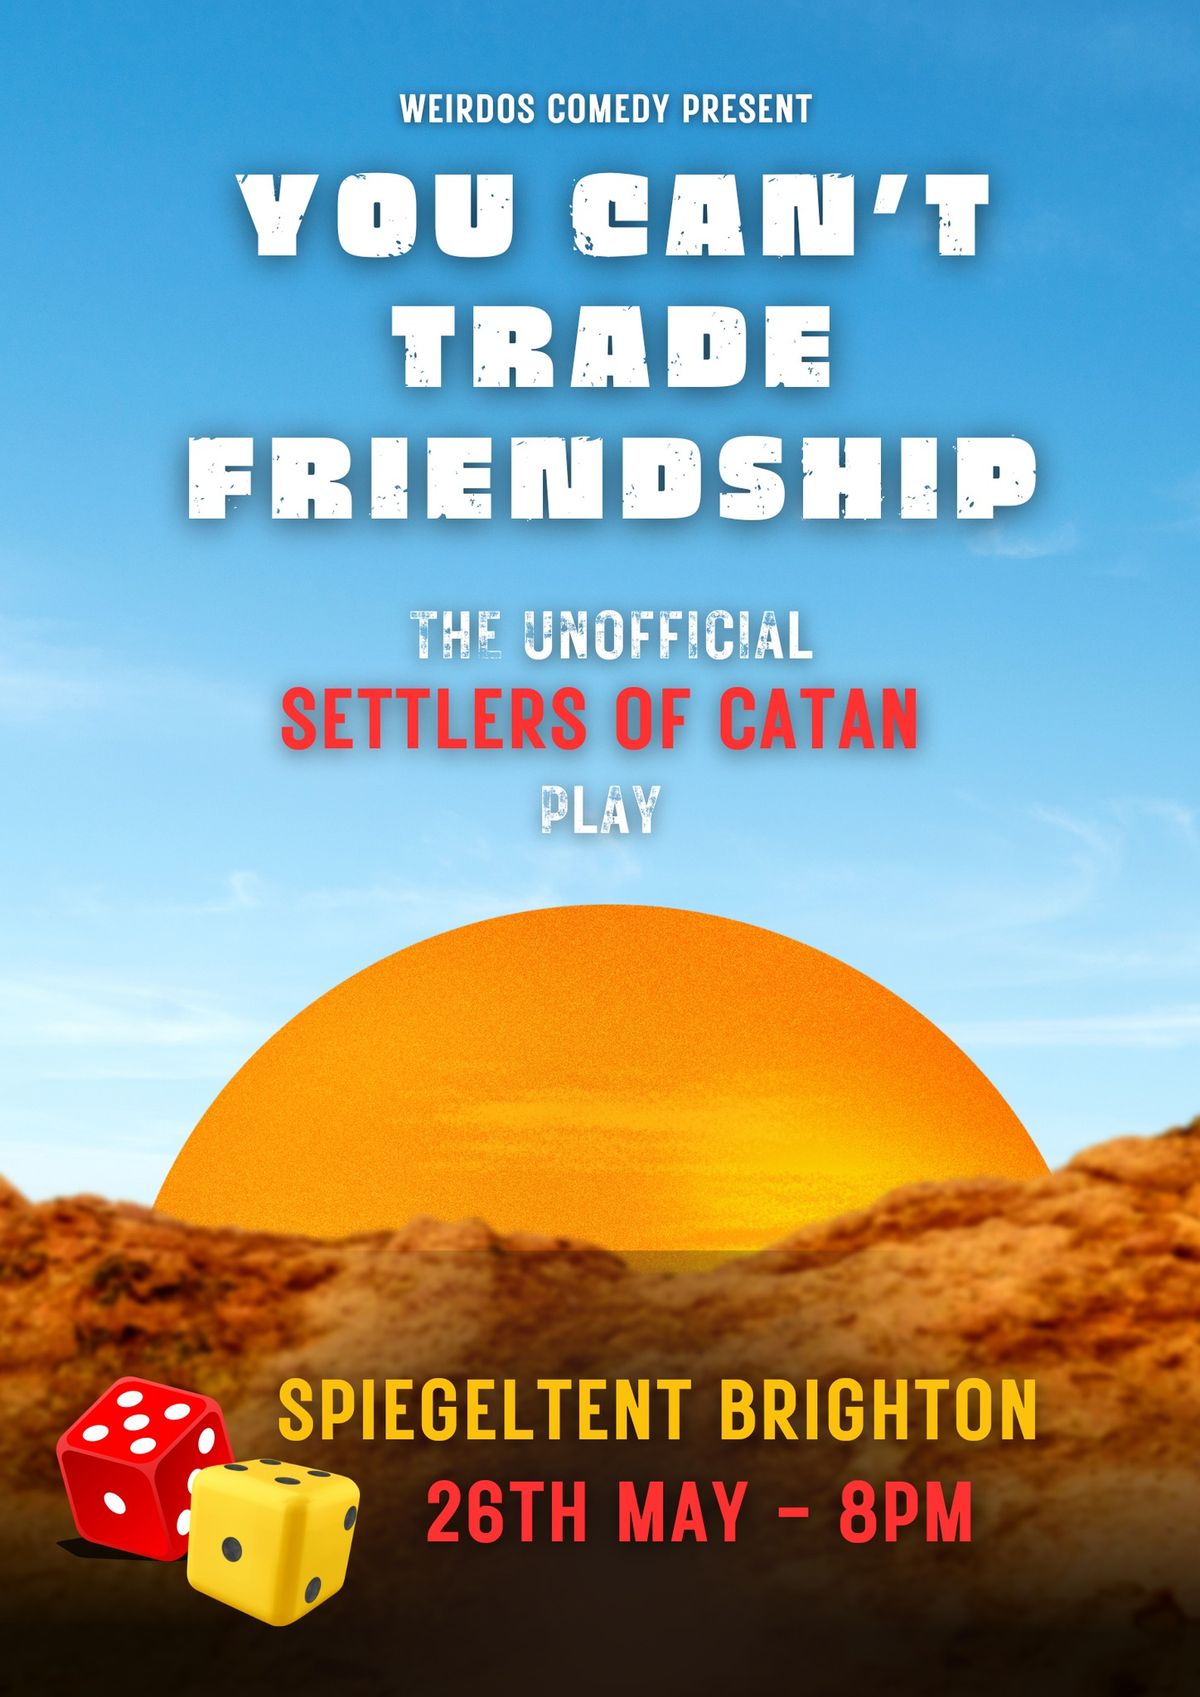 The [Unofficial] Settlers of Catan play: You can't trade friendship: 